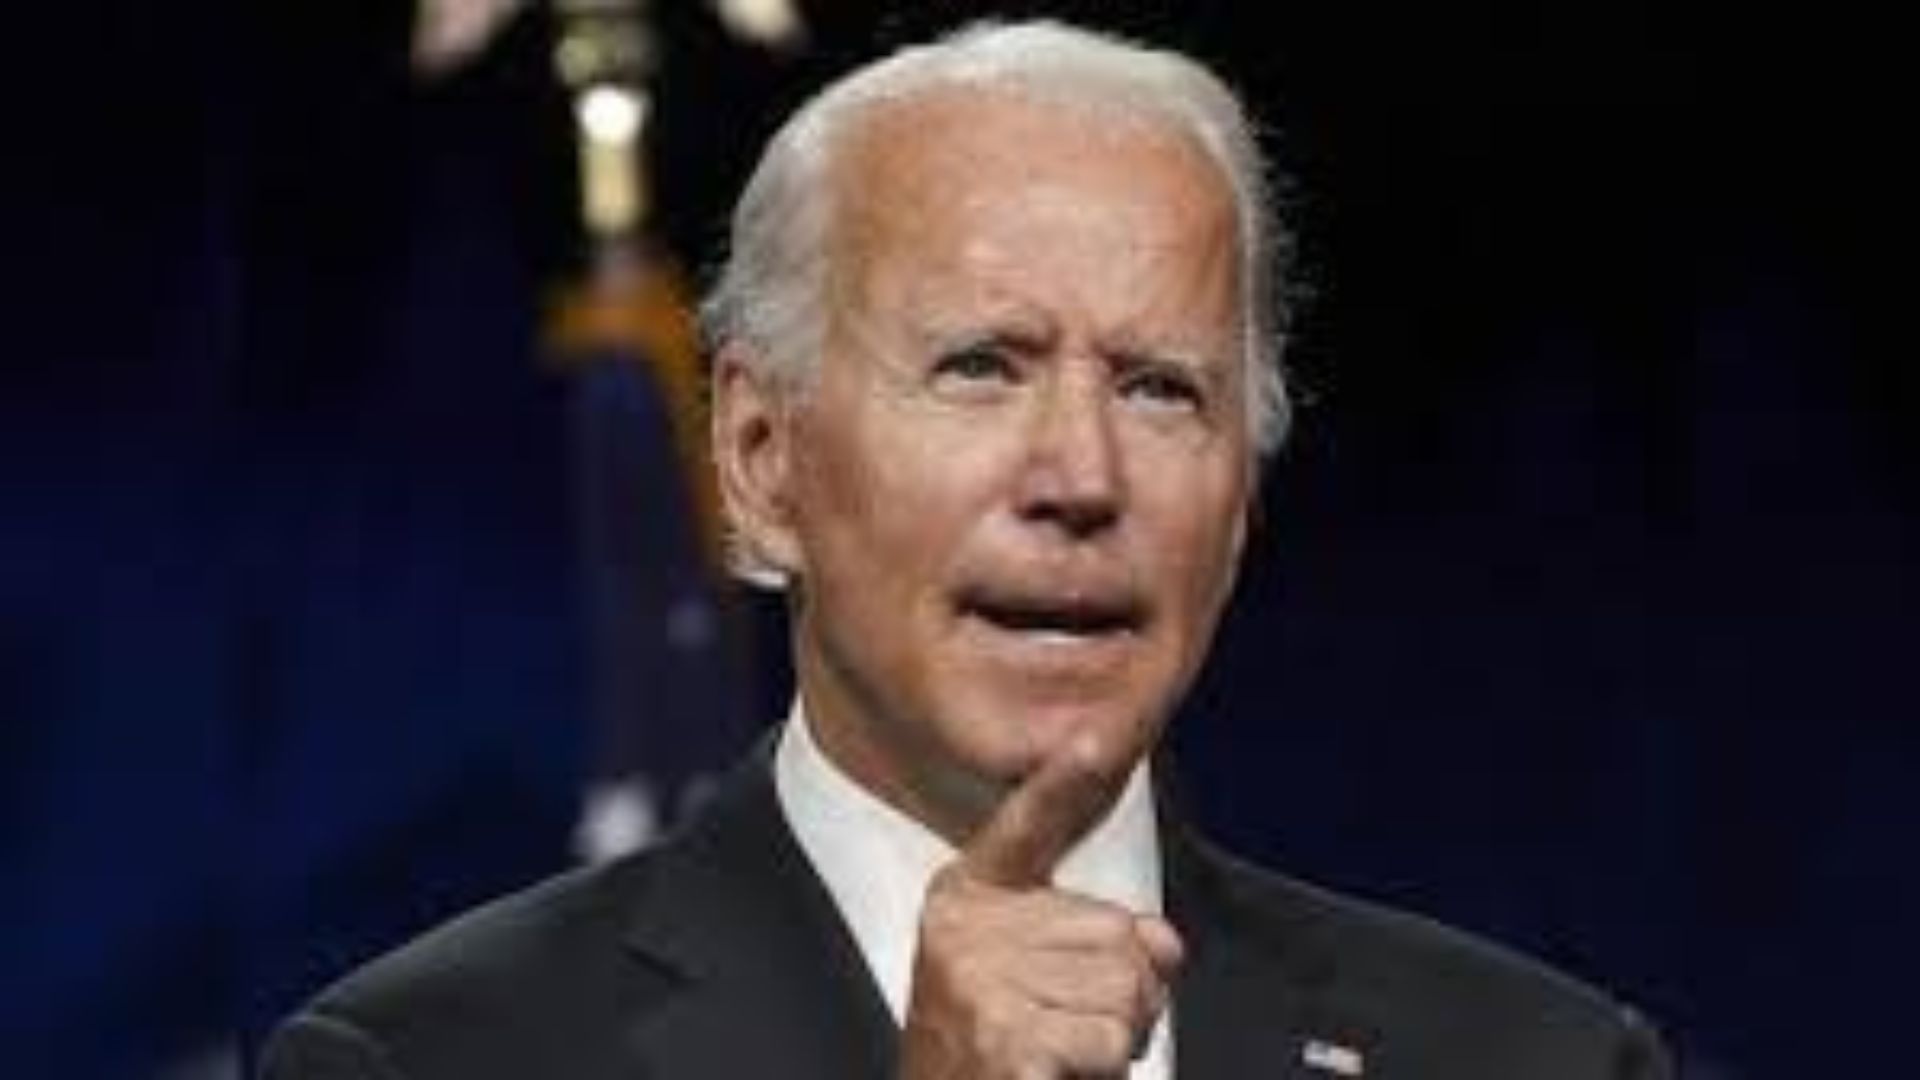 US President Joe Biden Reaffirms Support for Israel, issues warning to Iran